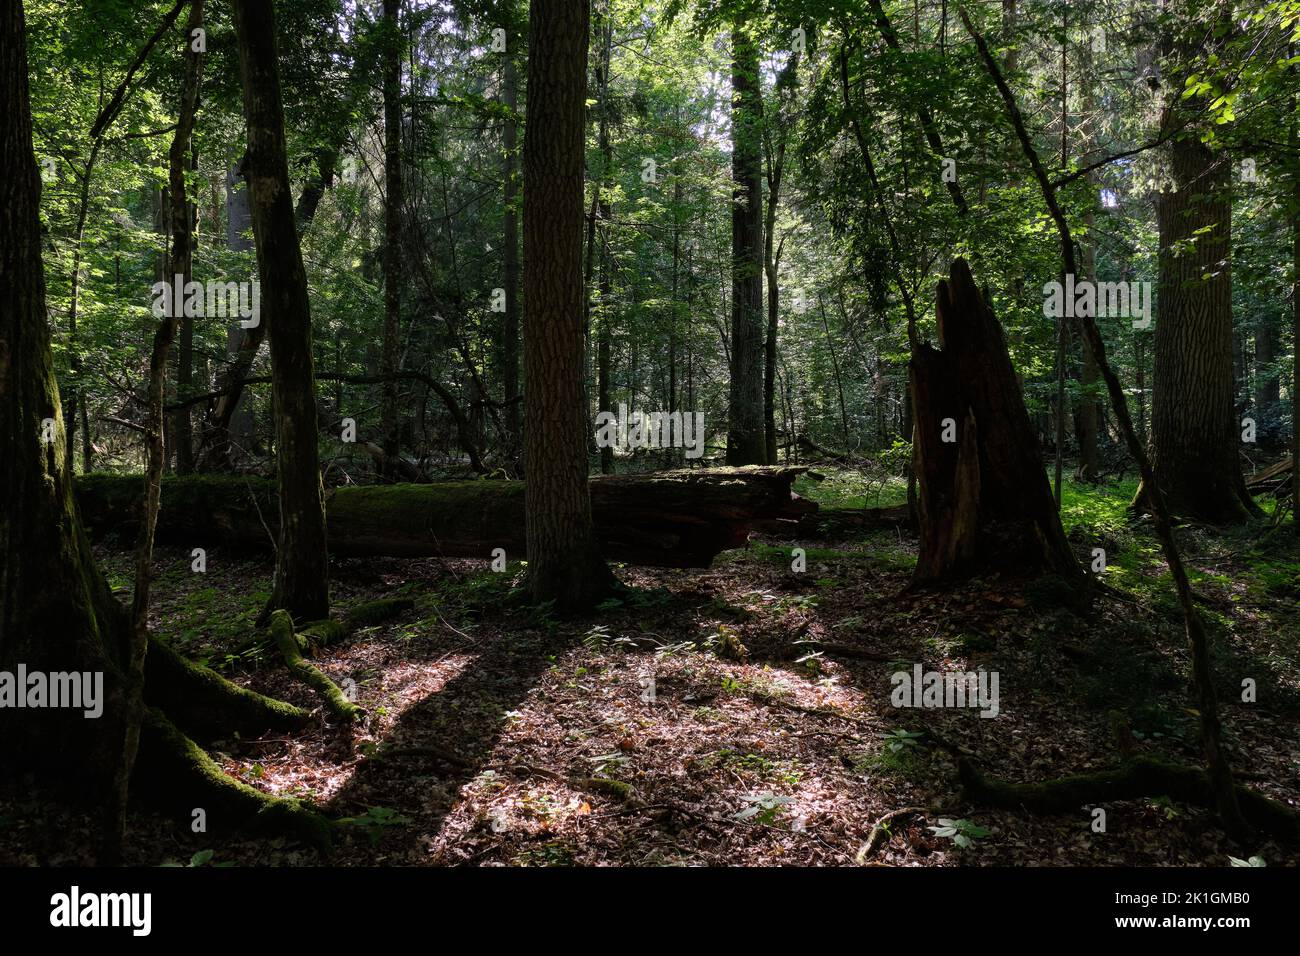 Shady deciduous tree stand with broken ash tree in foreground, Bialowieza Forest, Poland, Europe Stock Photo